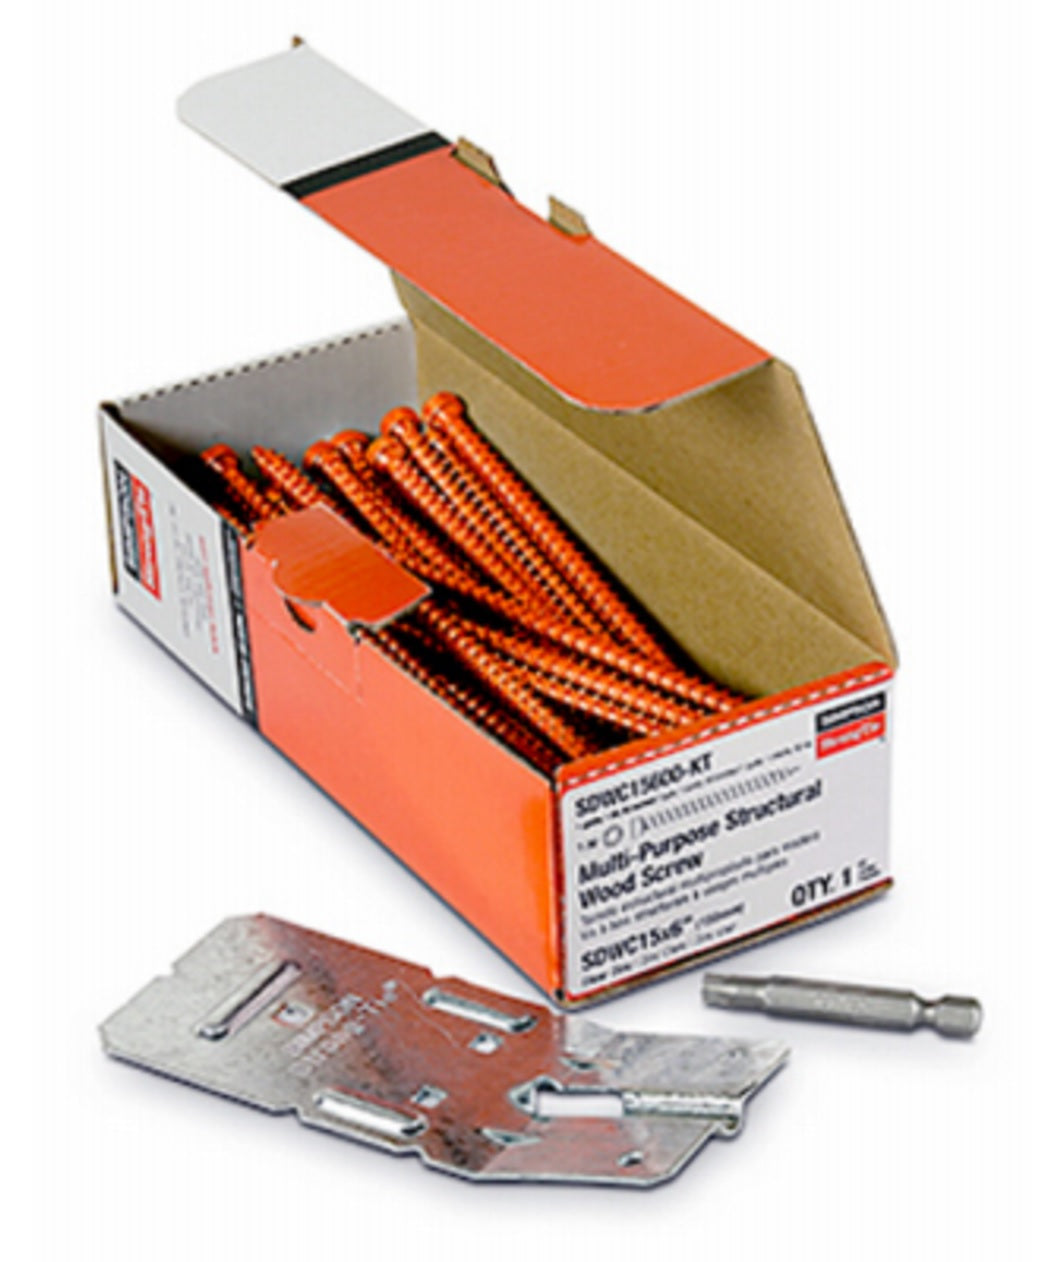 Simpson Strong-Tie SDWC15600-KT Strong-Drive Interior Wood Screws, Orange